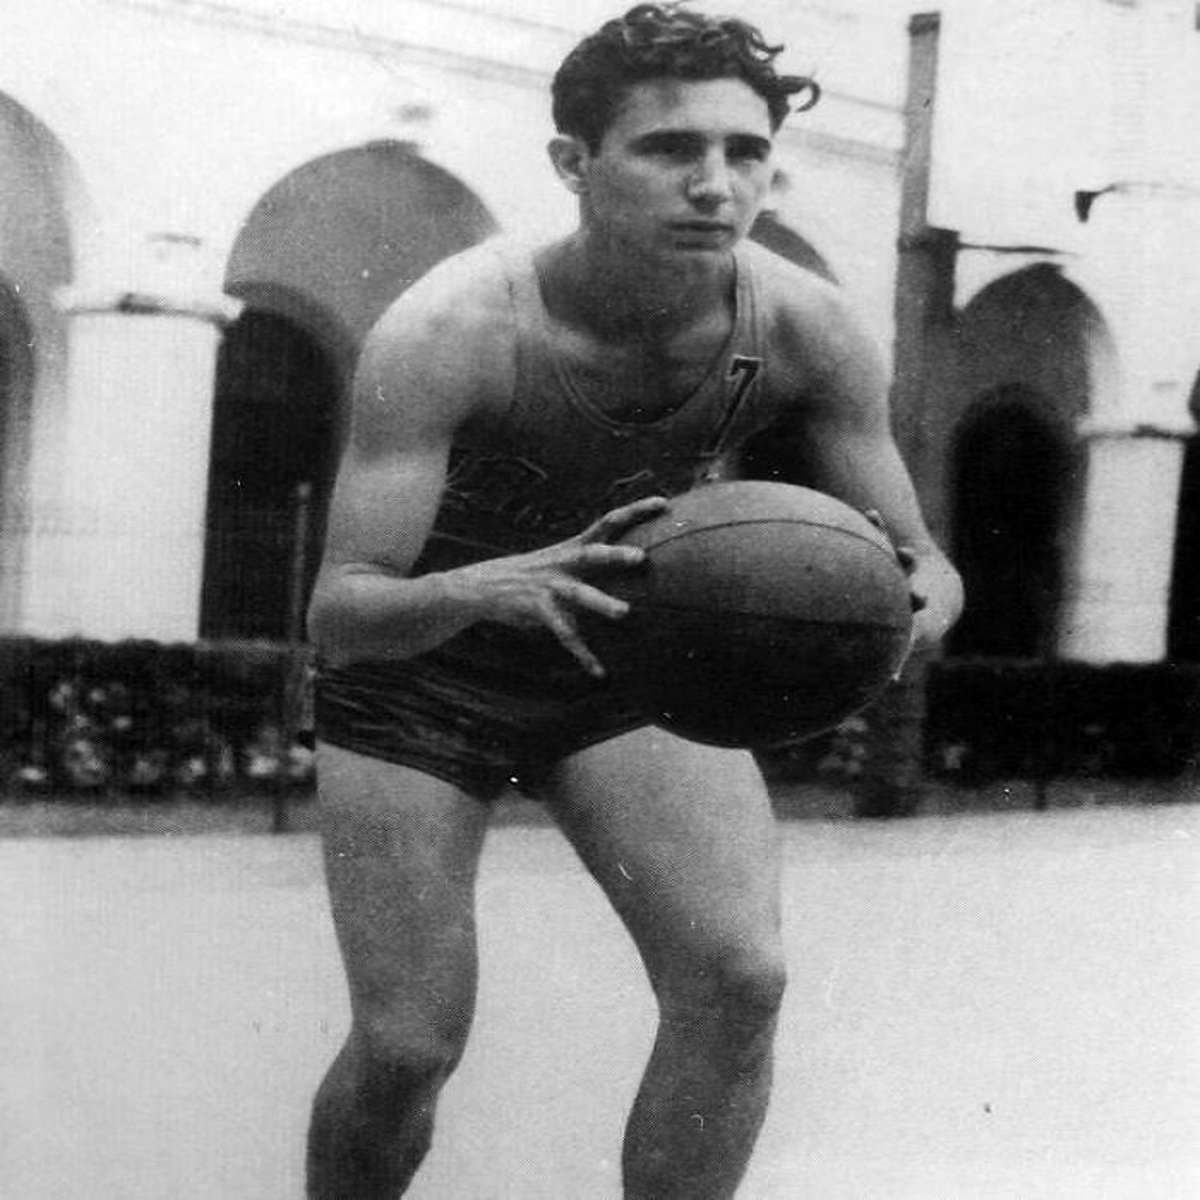 Fidel Castro Shooting Basketball With His School In 1943